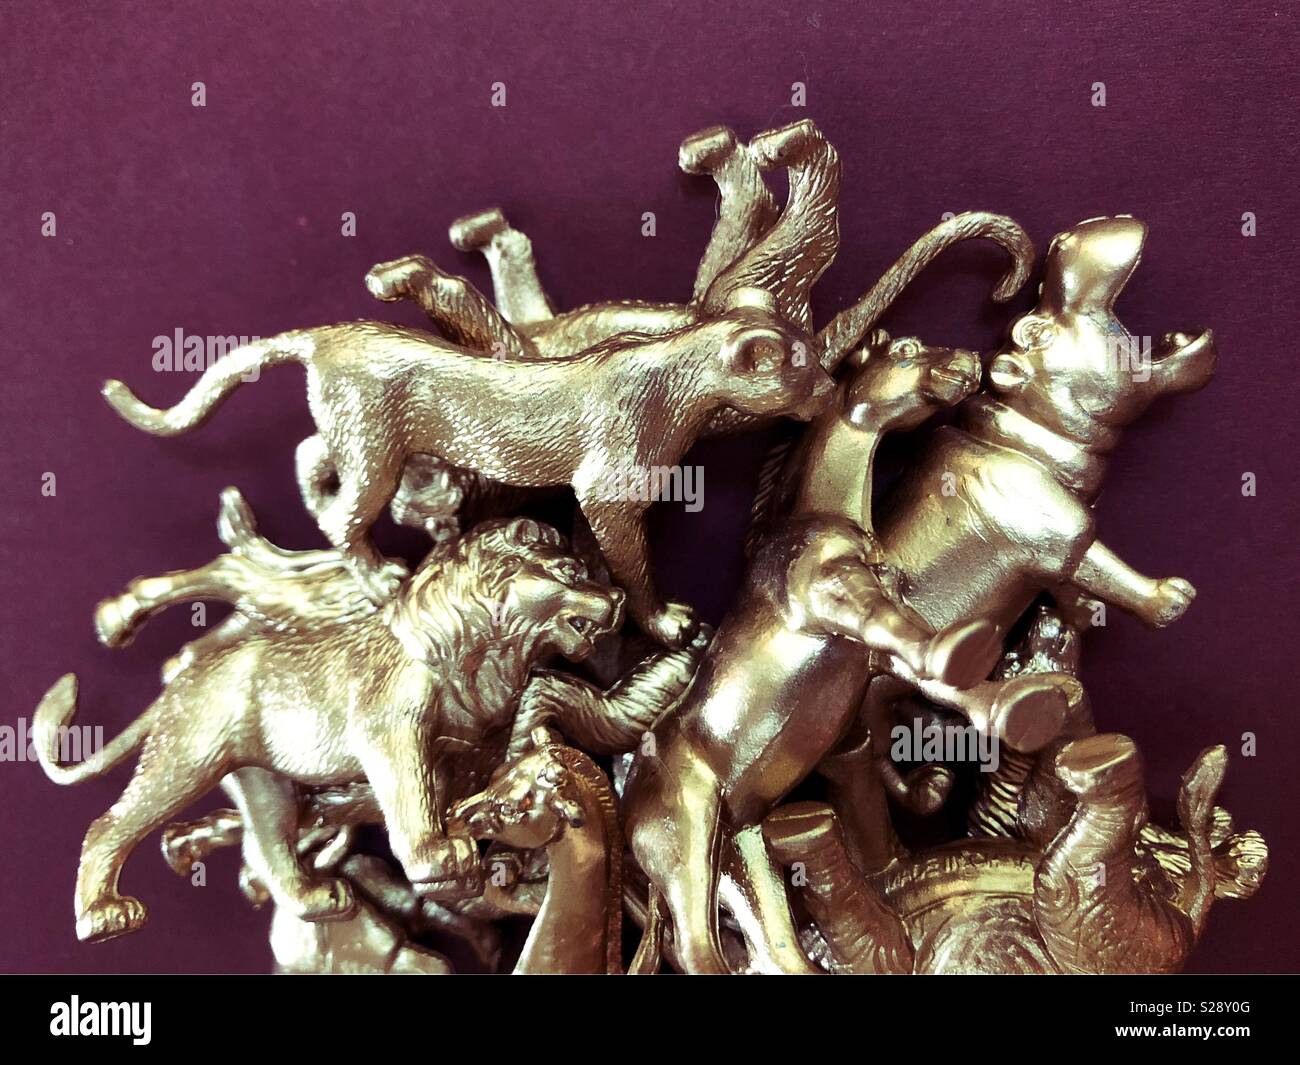 A pile of gold animal figurines Stock Photo - Alamy